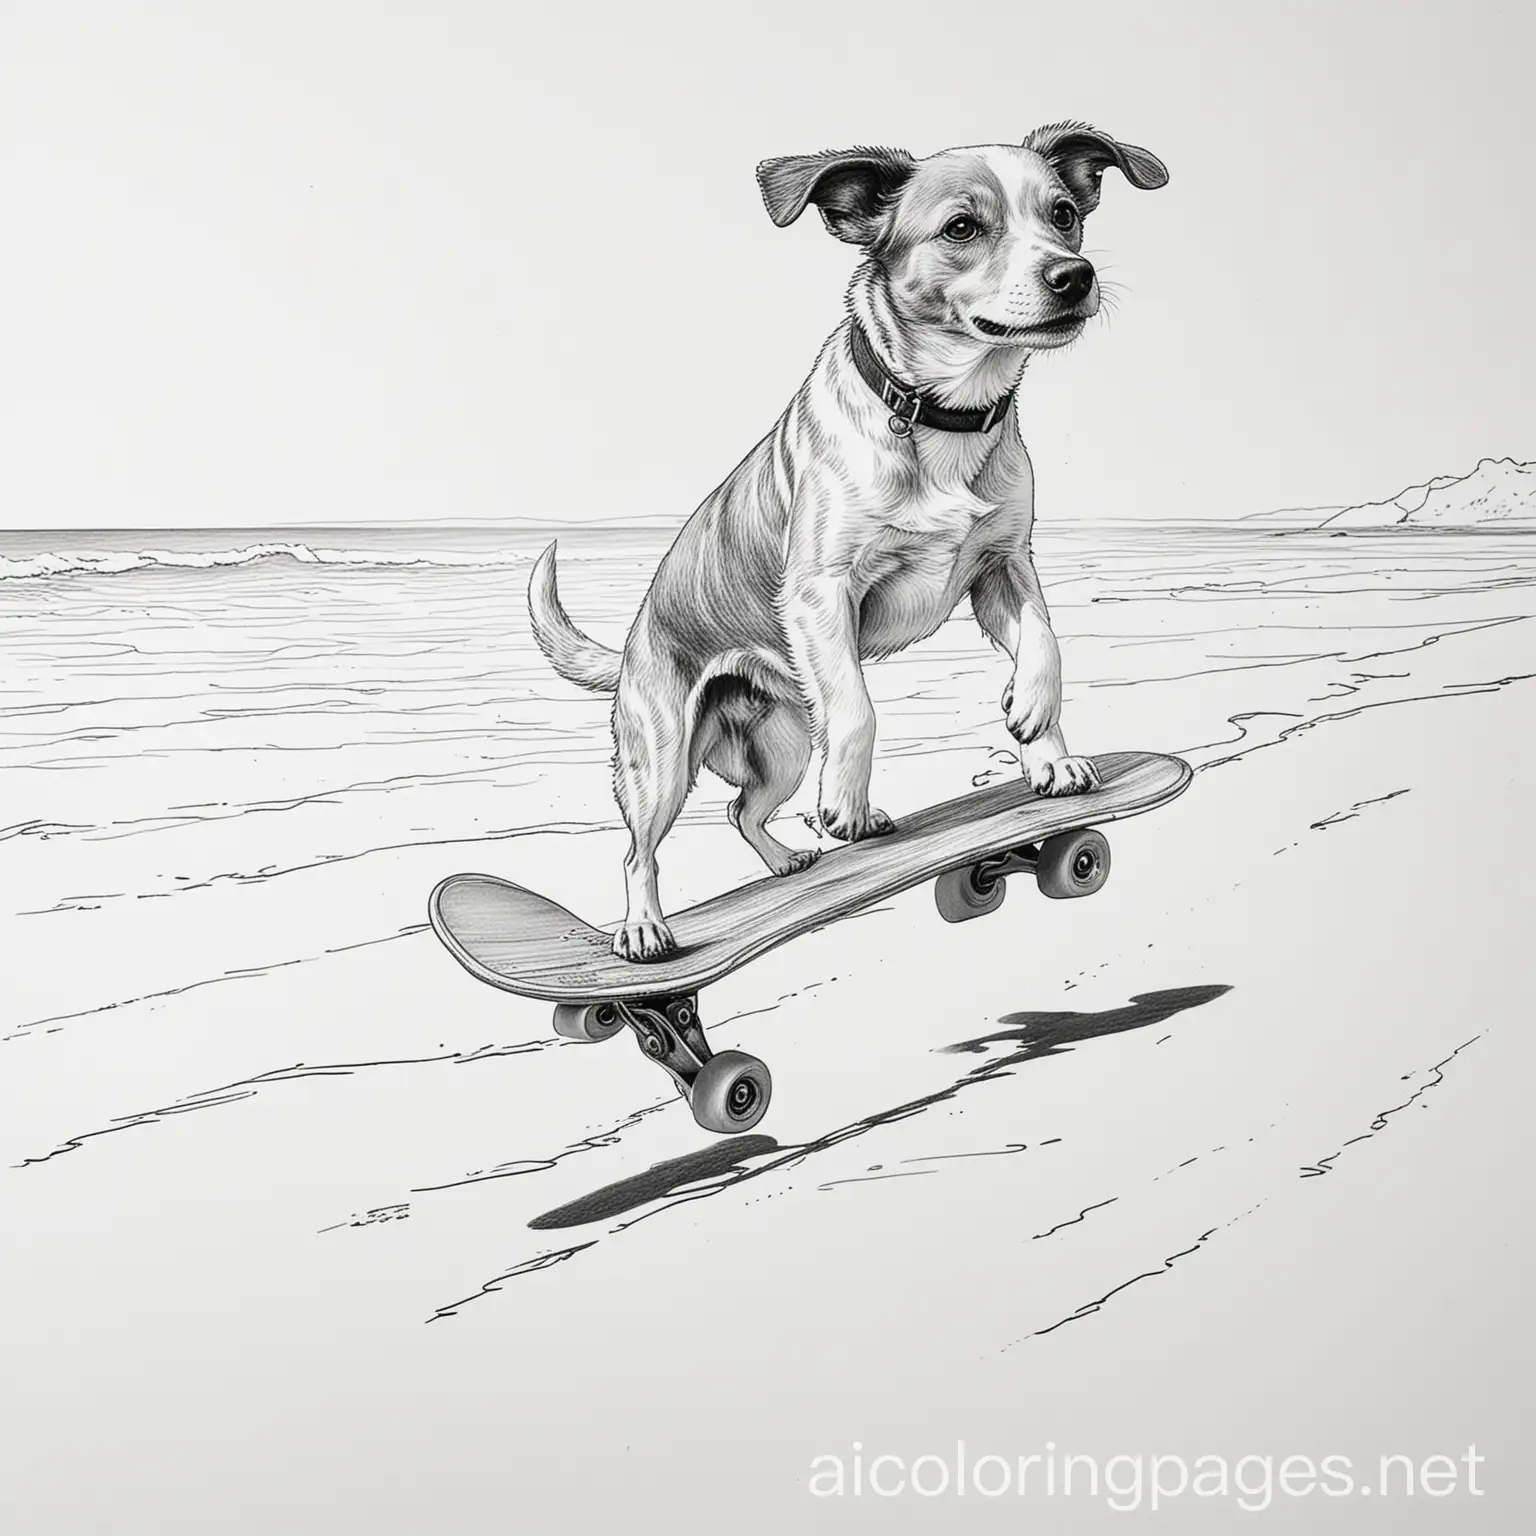 Dog-Skateboarding-at-the-Beach-Coloring-Page-for-Fun-and-Creativity